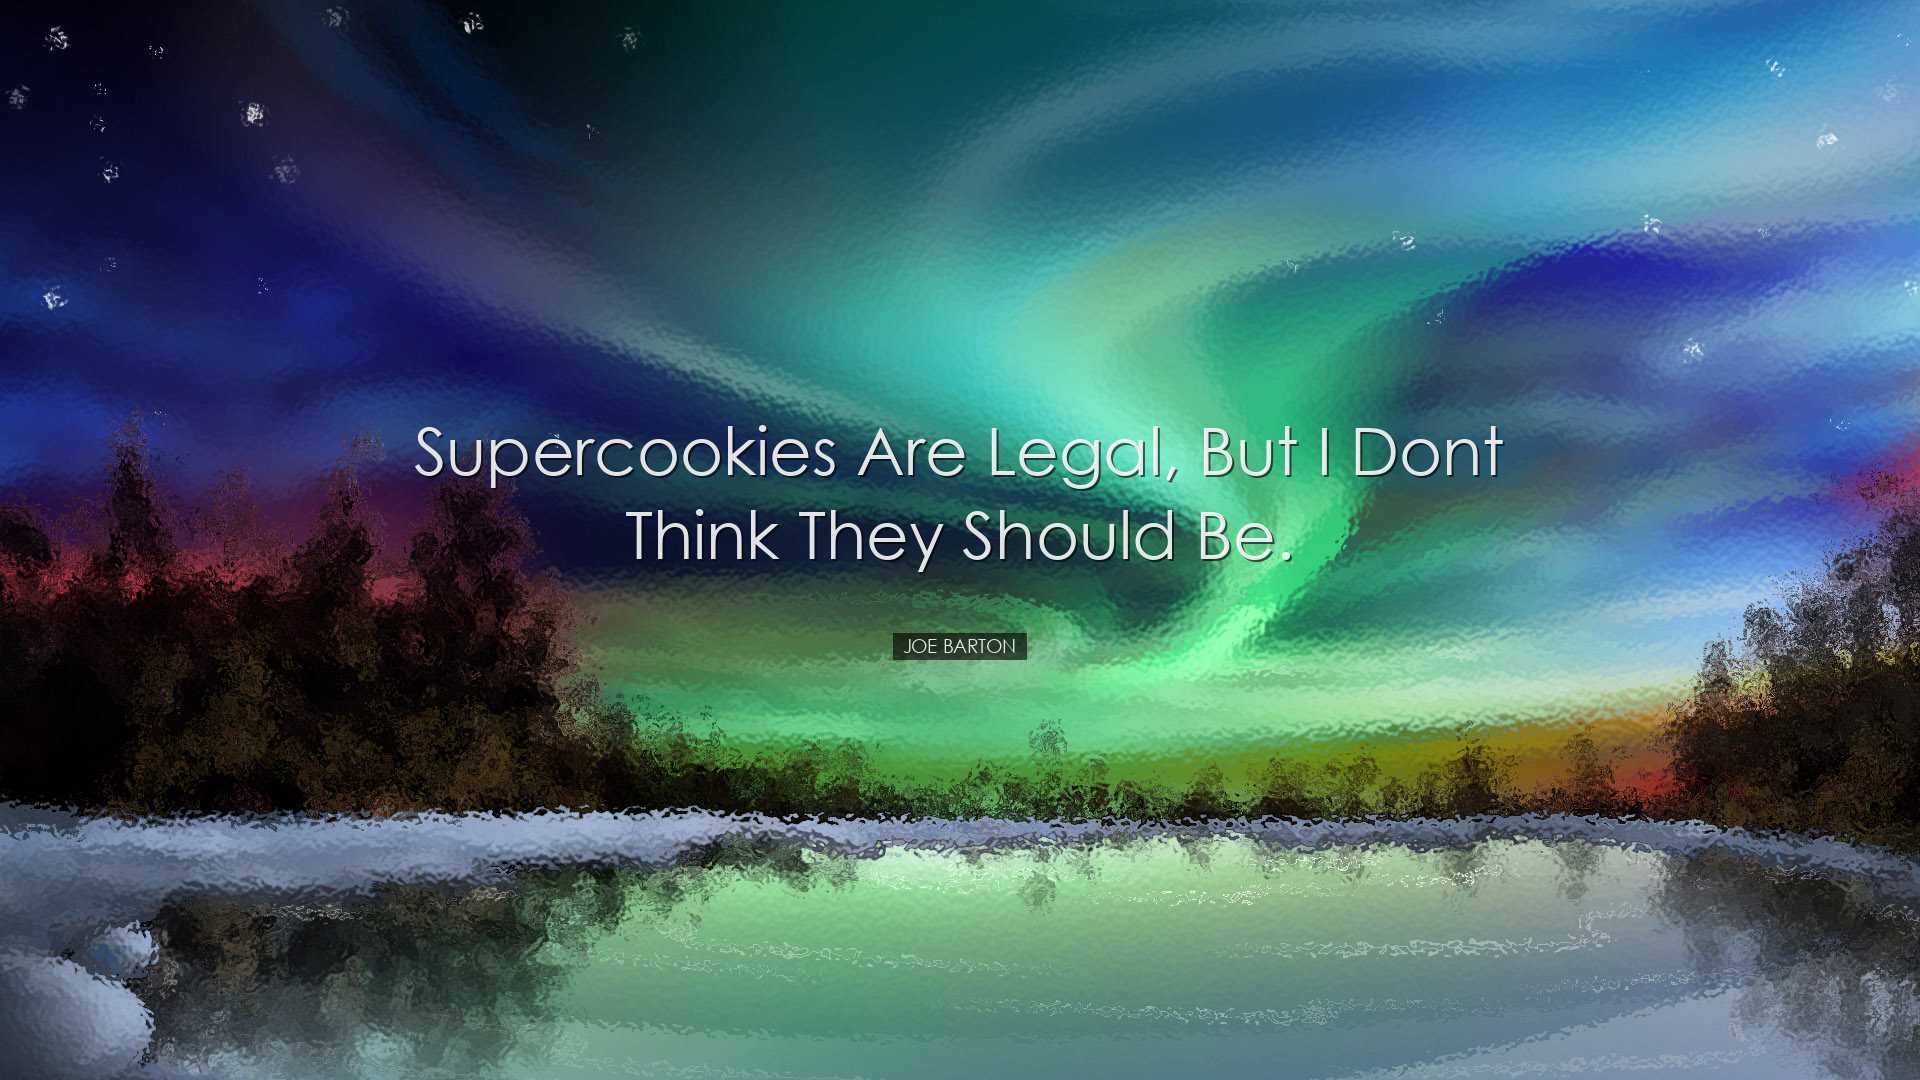 Supercookies are legal, but I dont think they should be. - Joe Bar